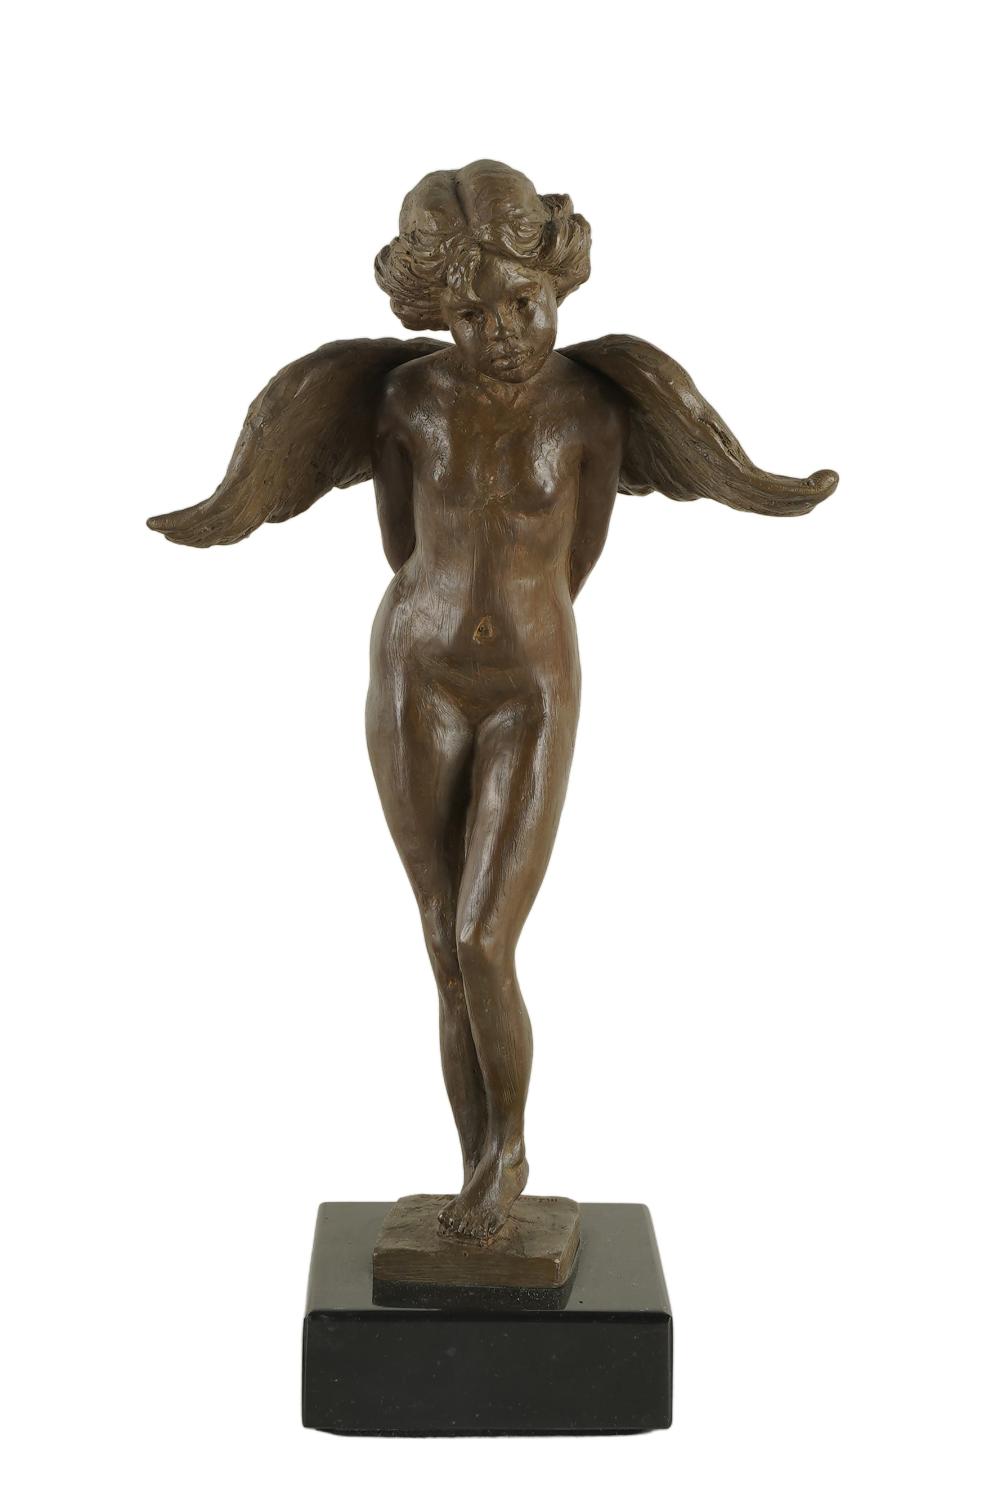 20TH CENTURY: FIGURE OF A WINGED